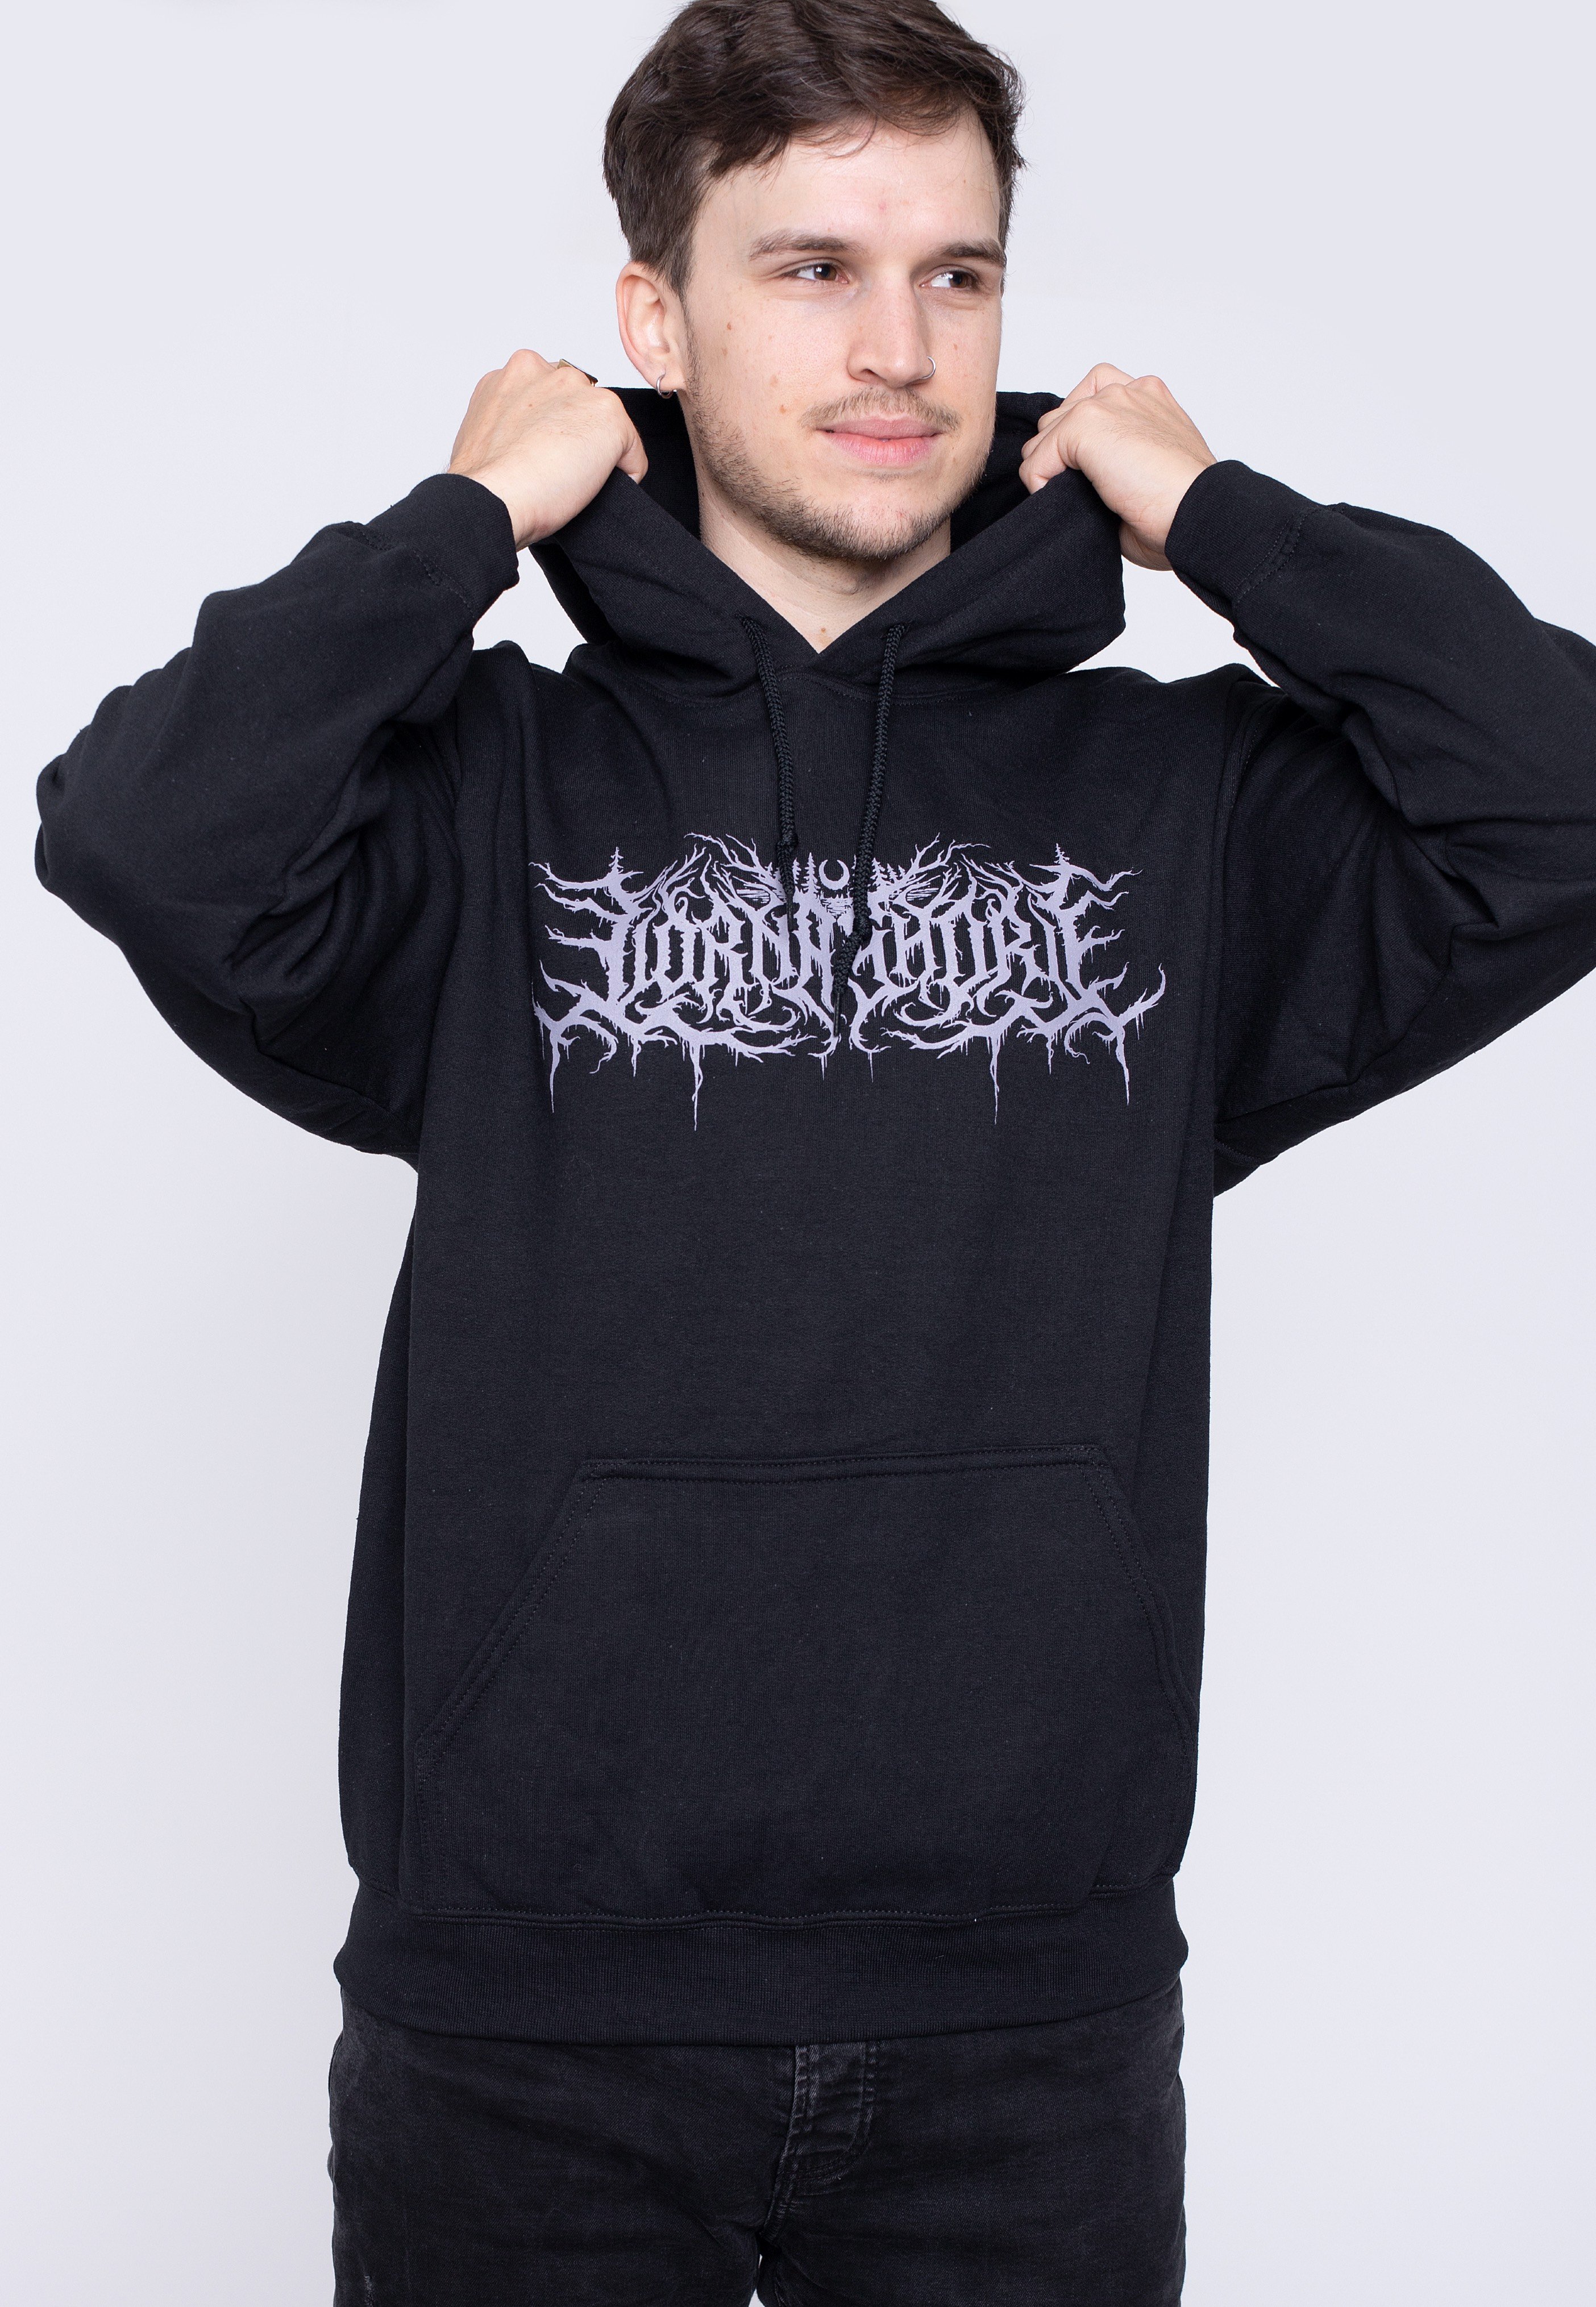 Lorna Shore - And I Return To Nothingness - Hoodie | IMPERICON UK